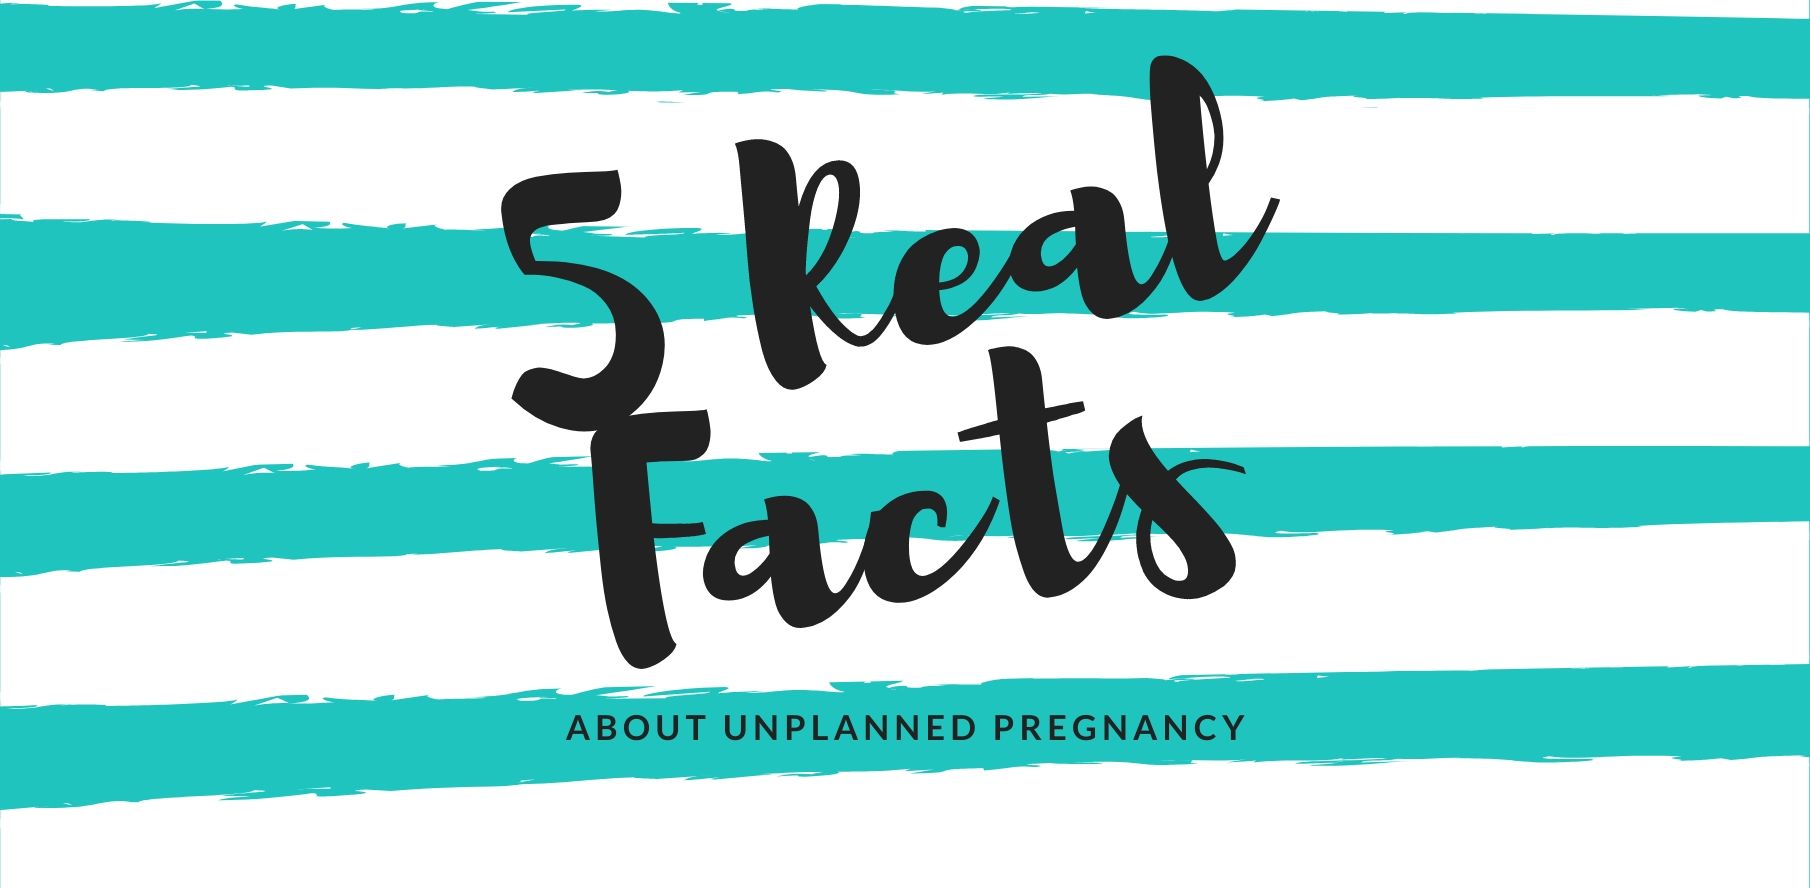 facts about unplanned pregnancy